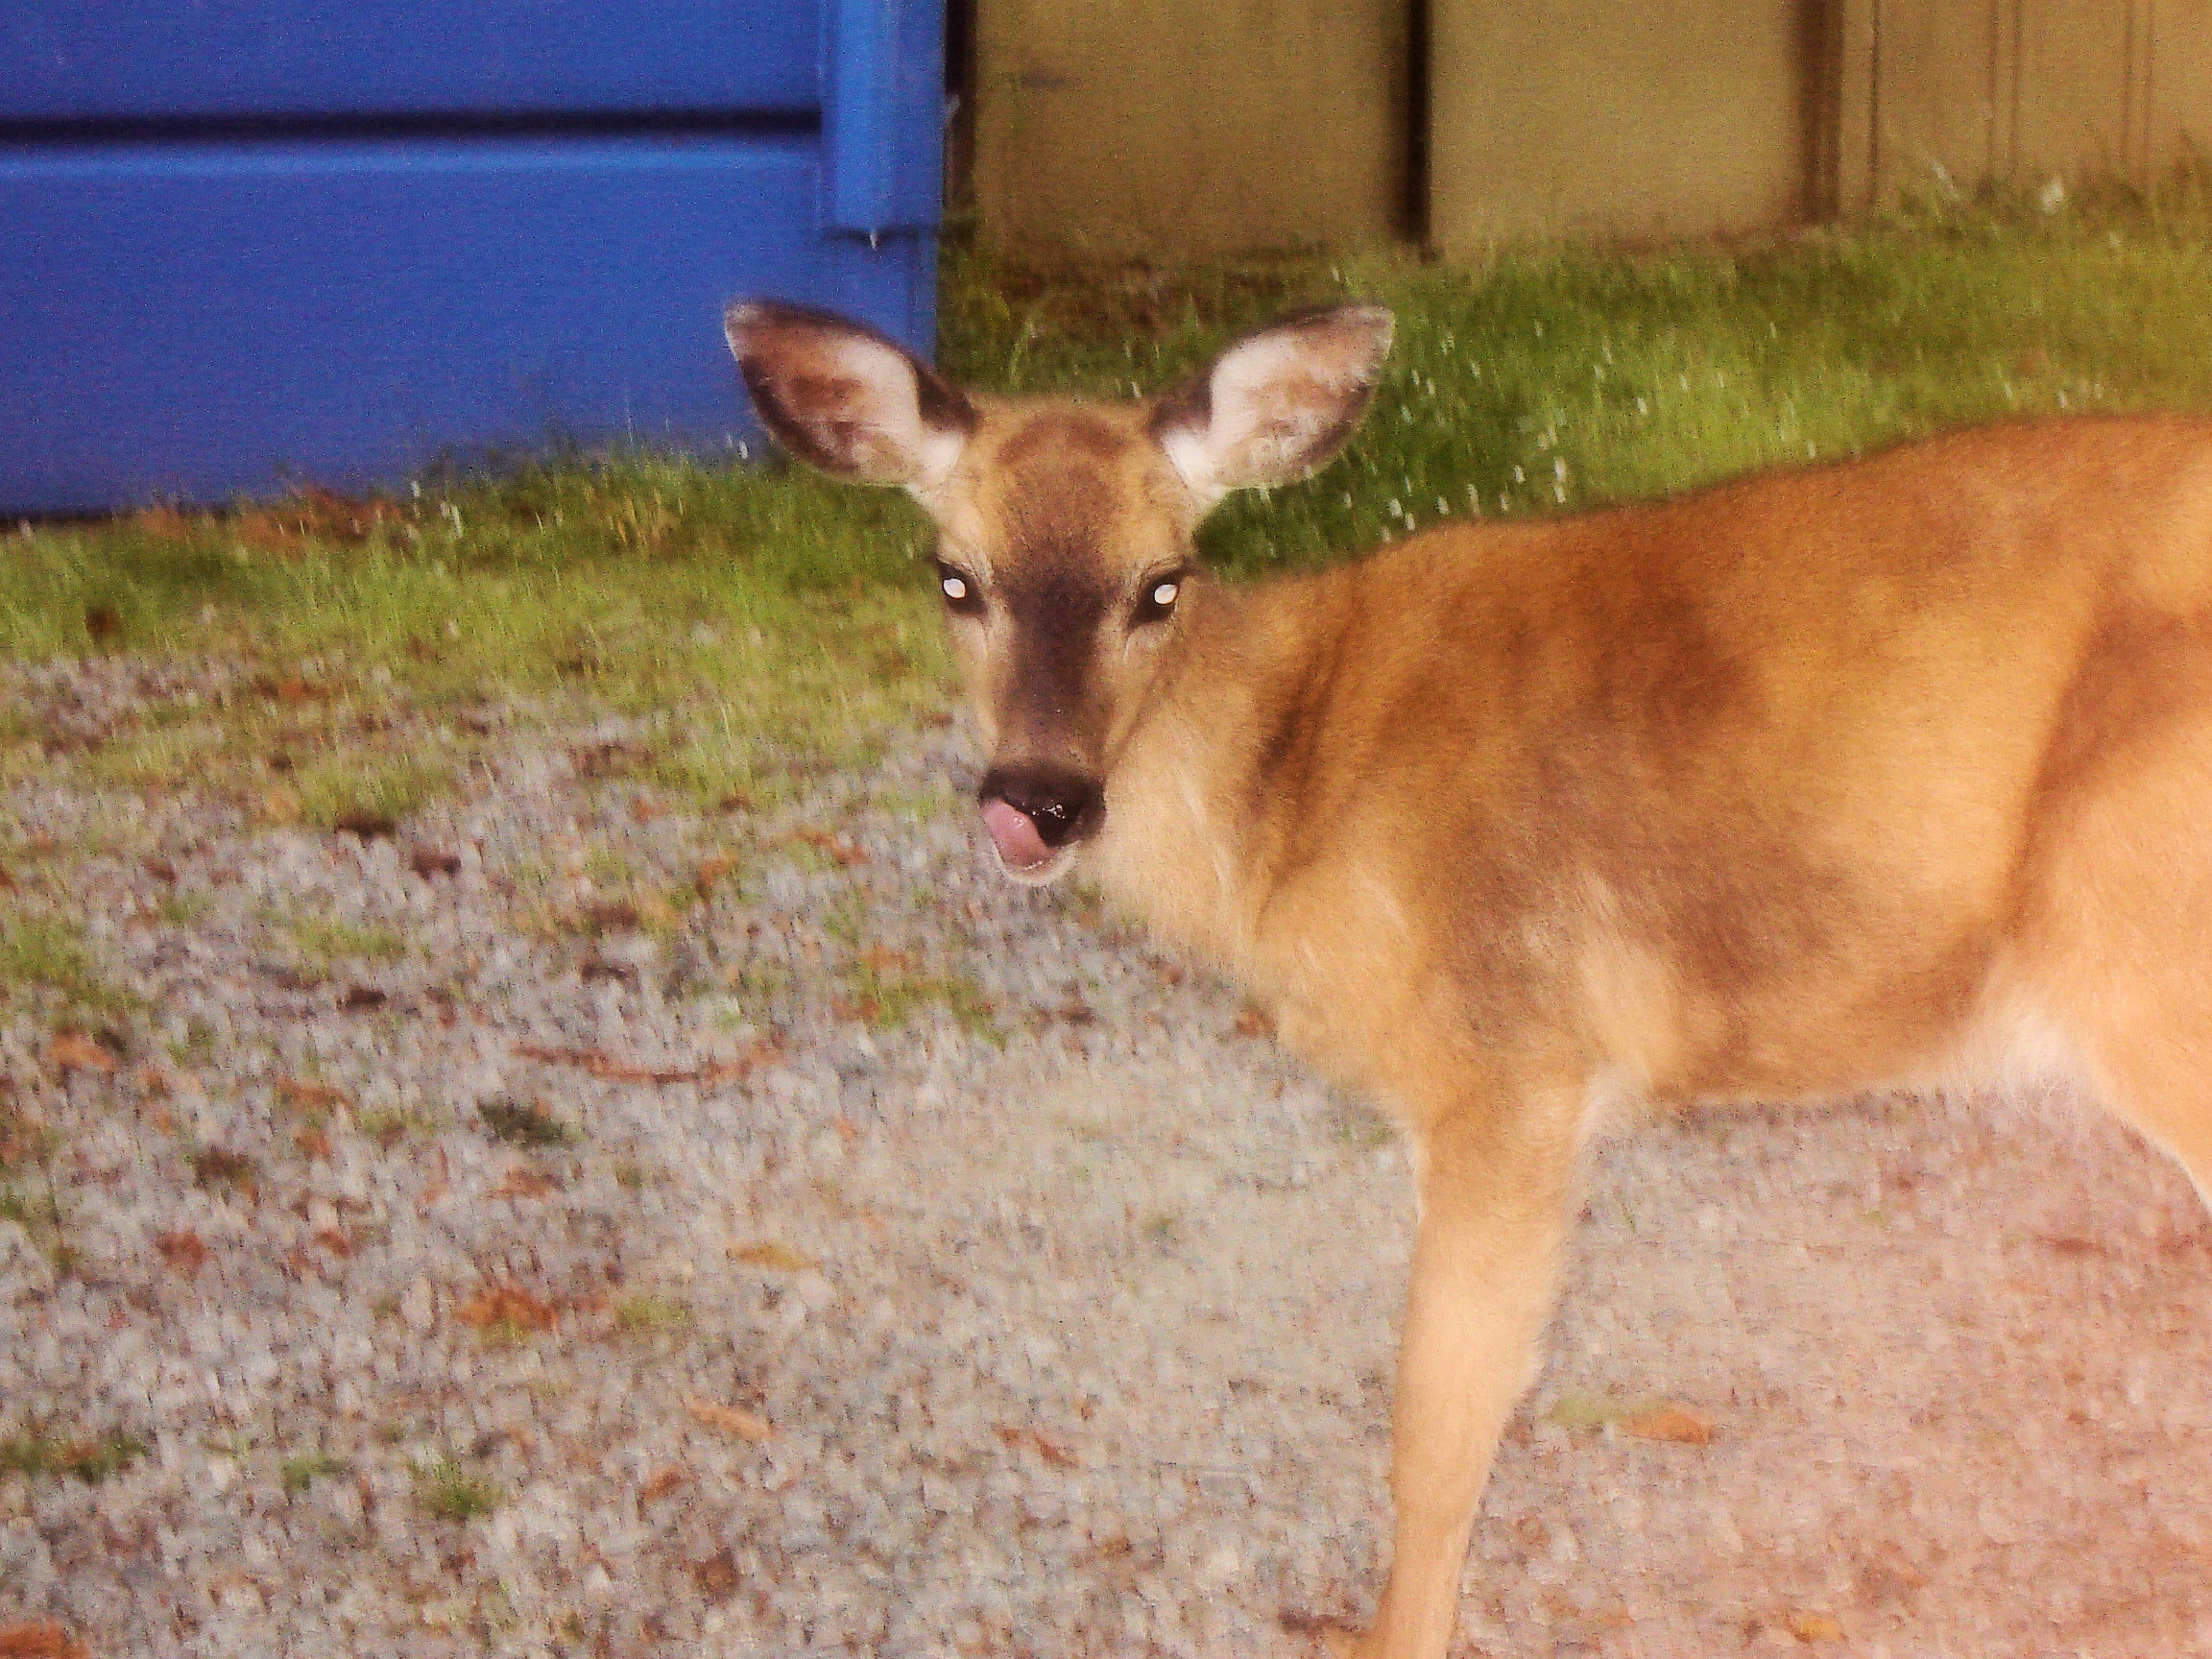 Photo of a deer with its tongue sticking out